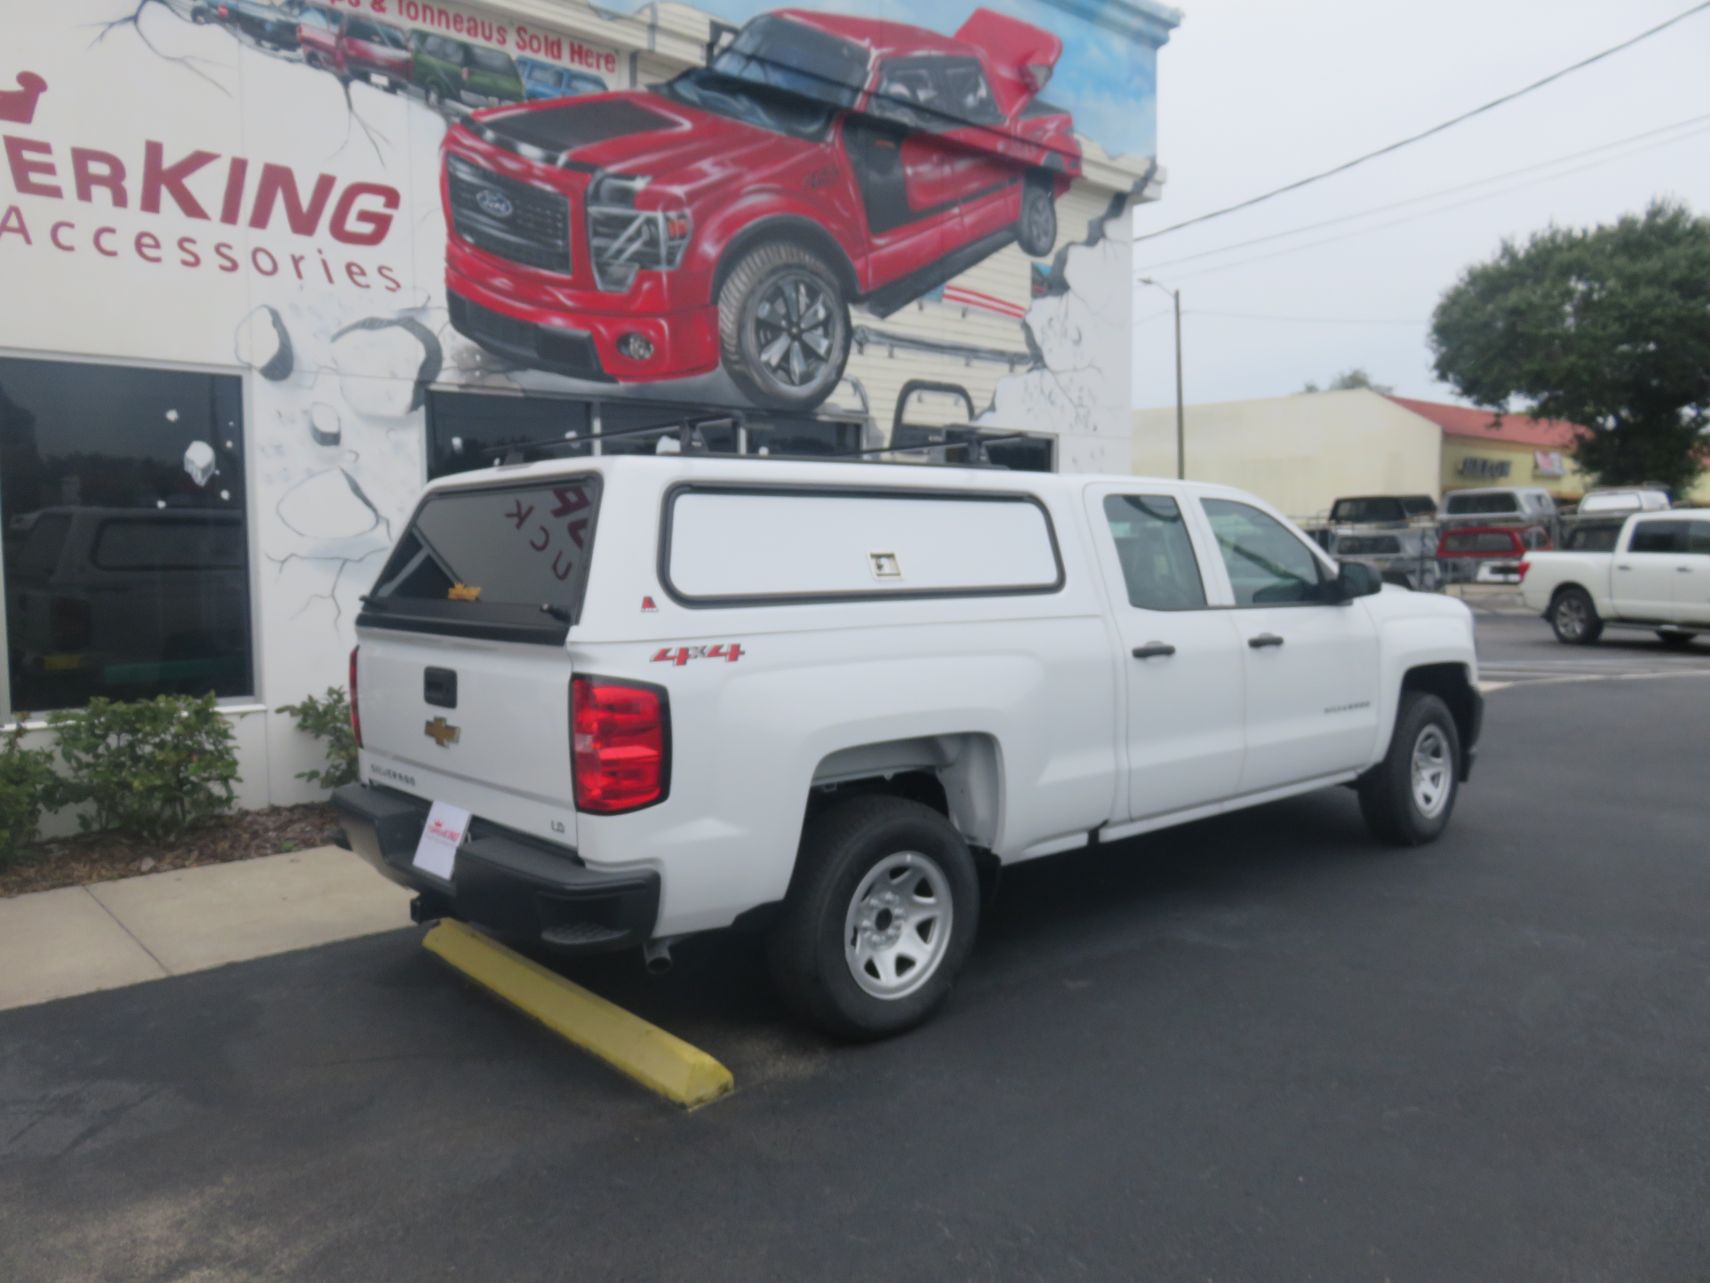 Chevy Silverado Leer 100rcc And Hitch Topperking Topperking Providing All Of Tampa Bay With Quality Truck Accessories